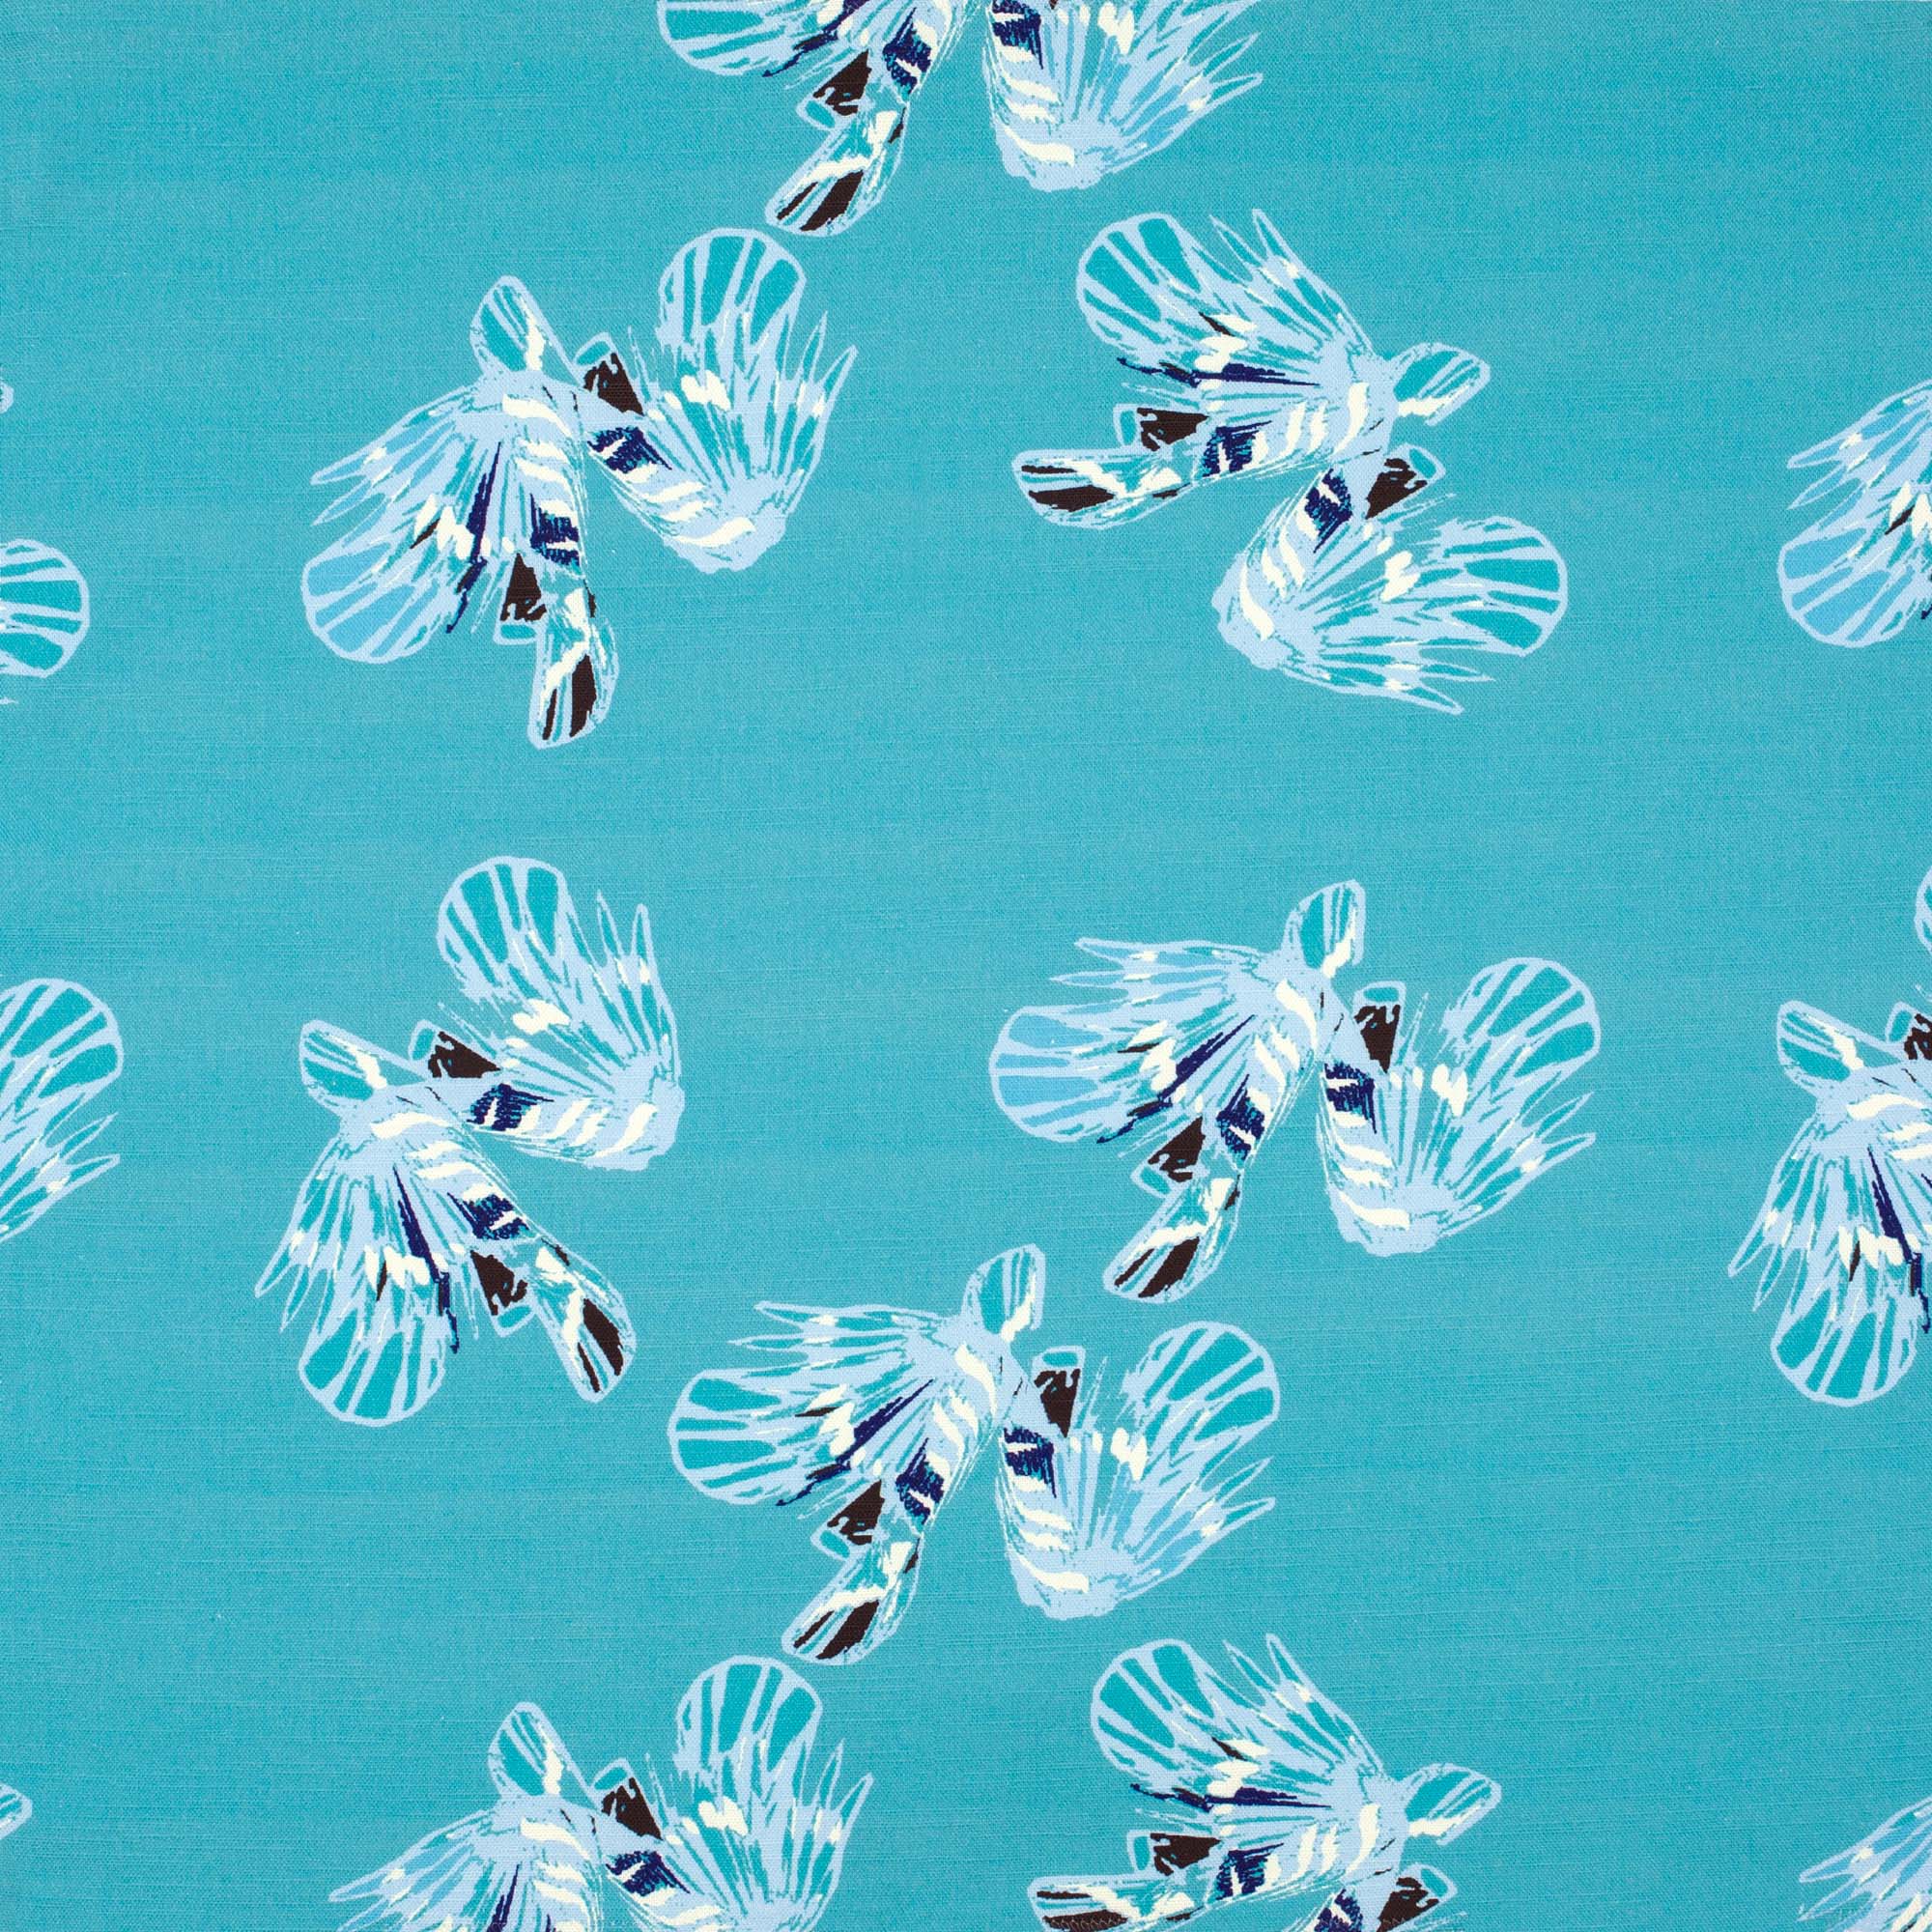 Detail of fabric in a playful feather print in blue and navy on a turquoise field.